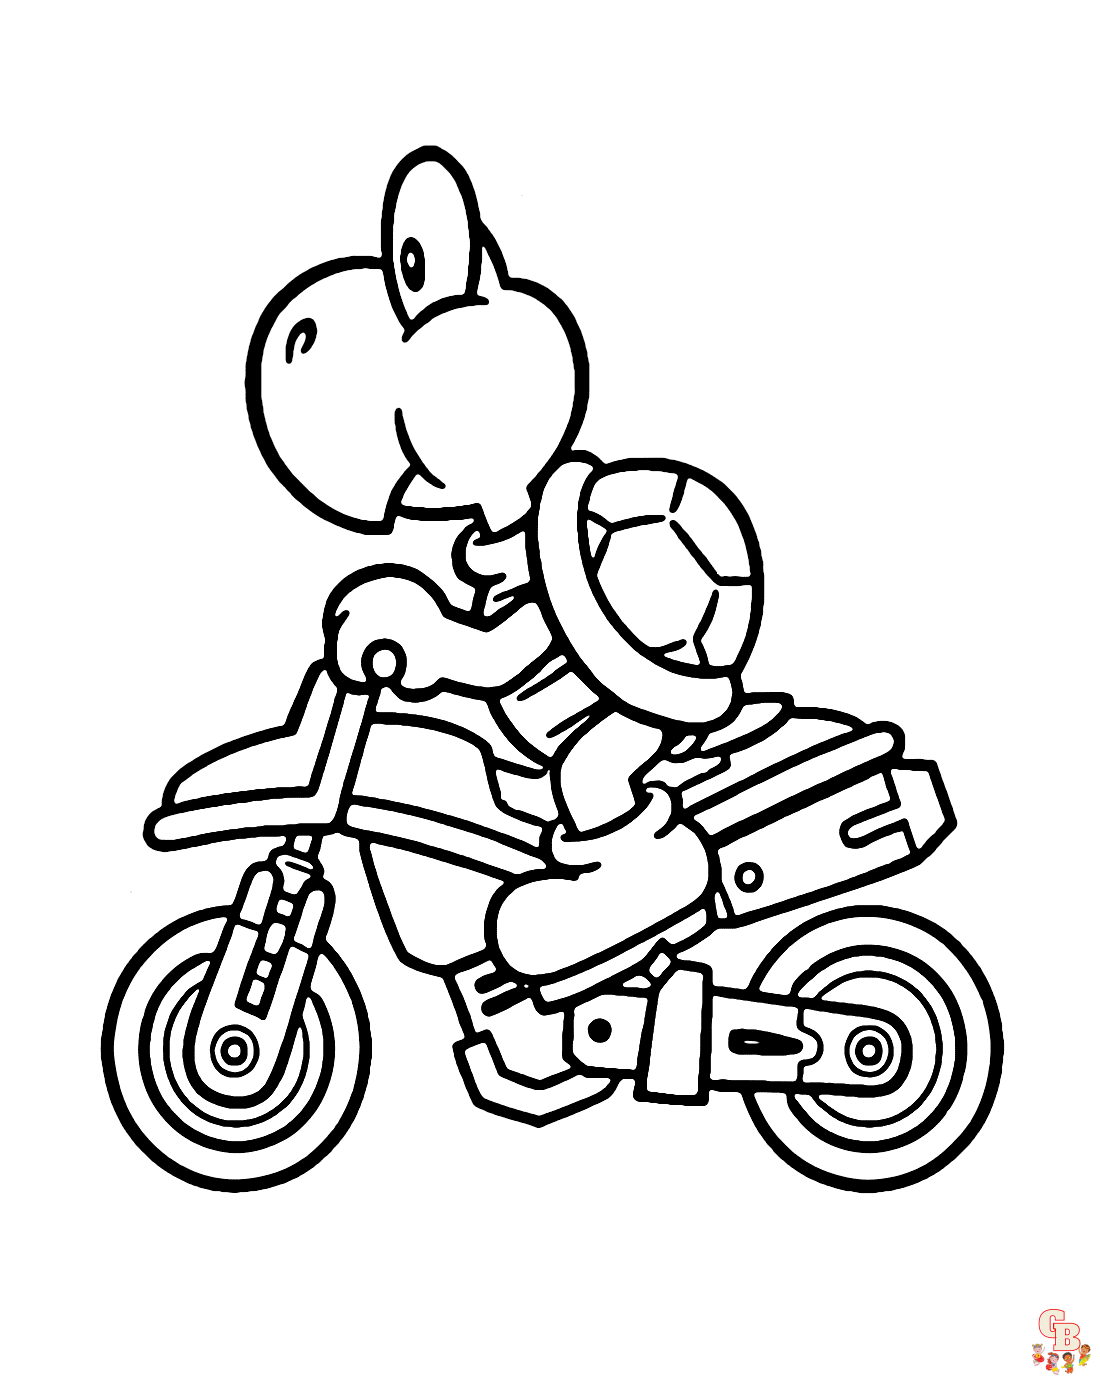 Free Koopa Troopa coloring pages for kids